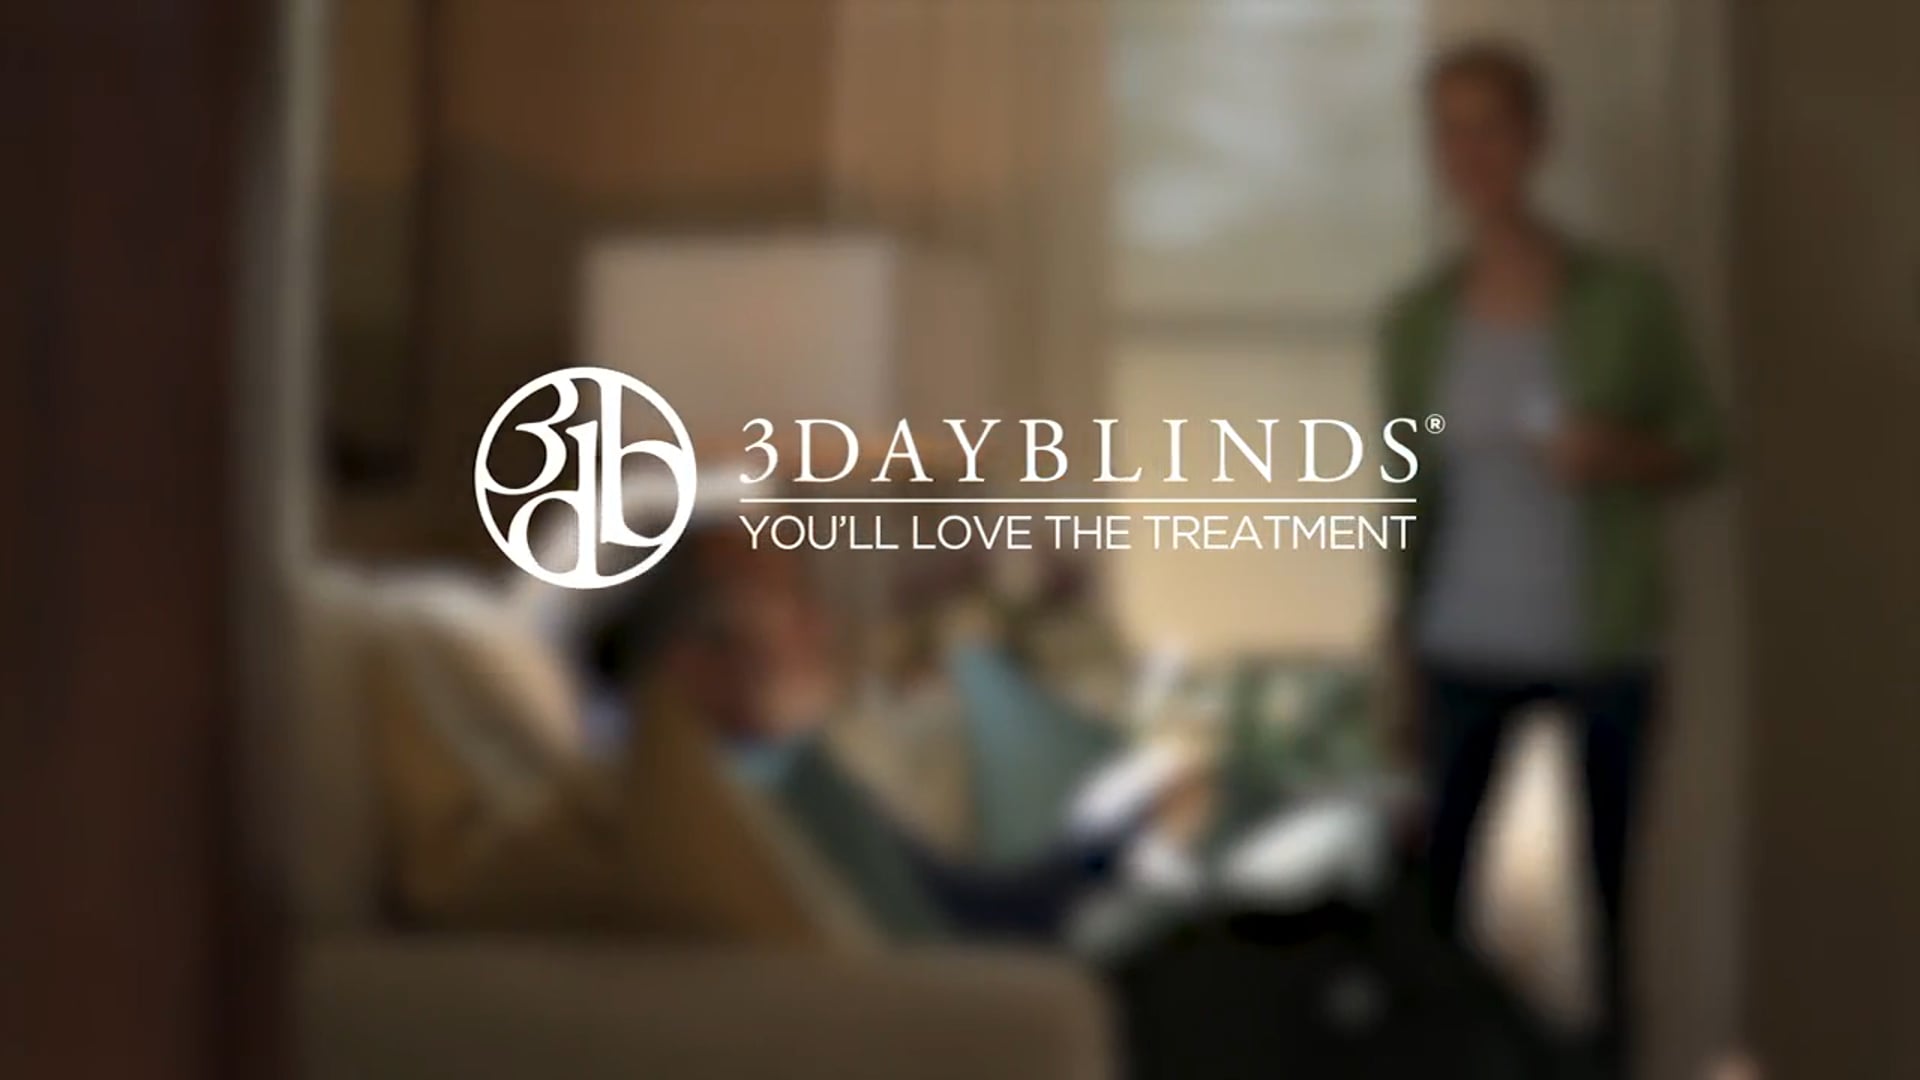 3 Day Blinds - You'll Love the Treatment 30s